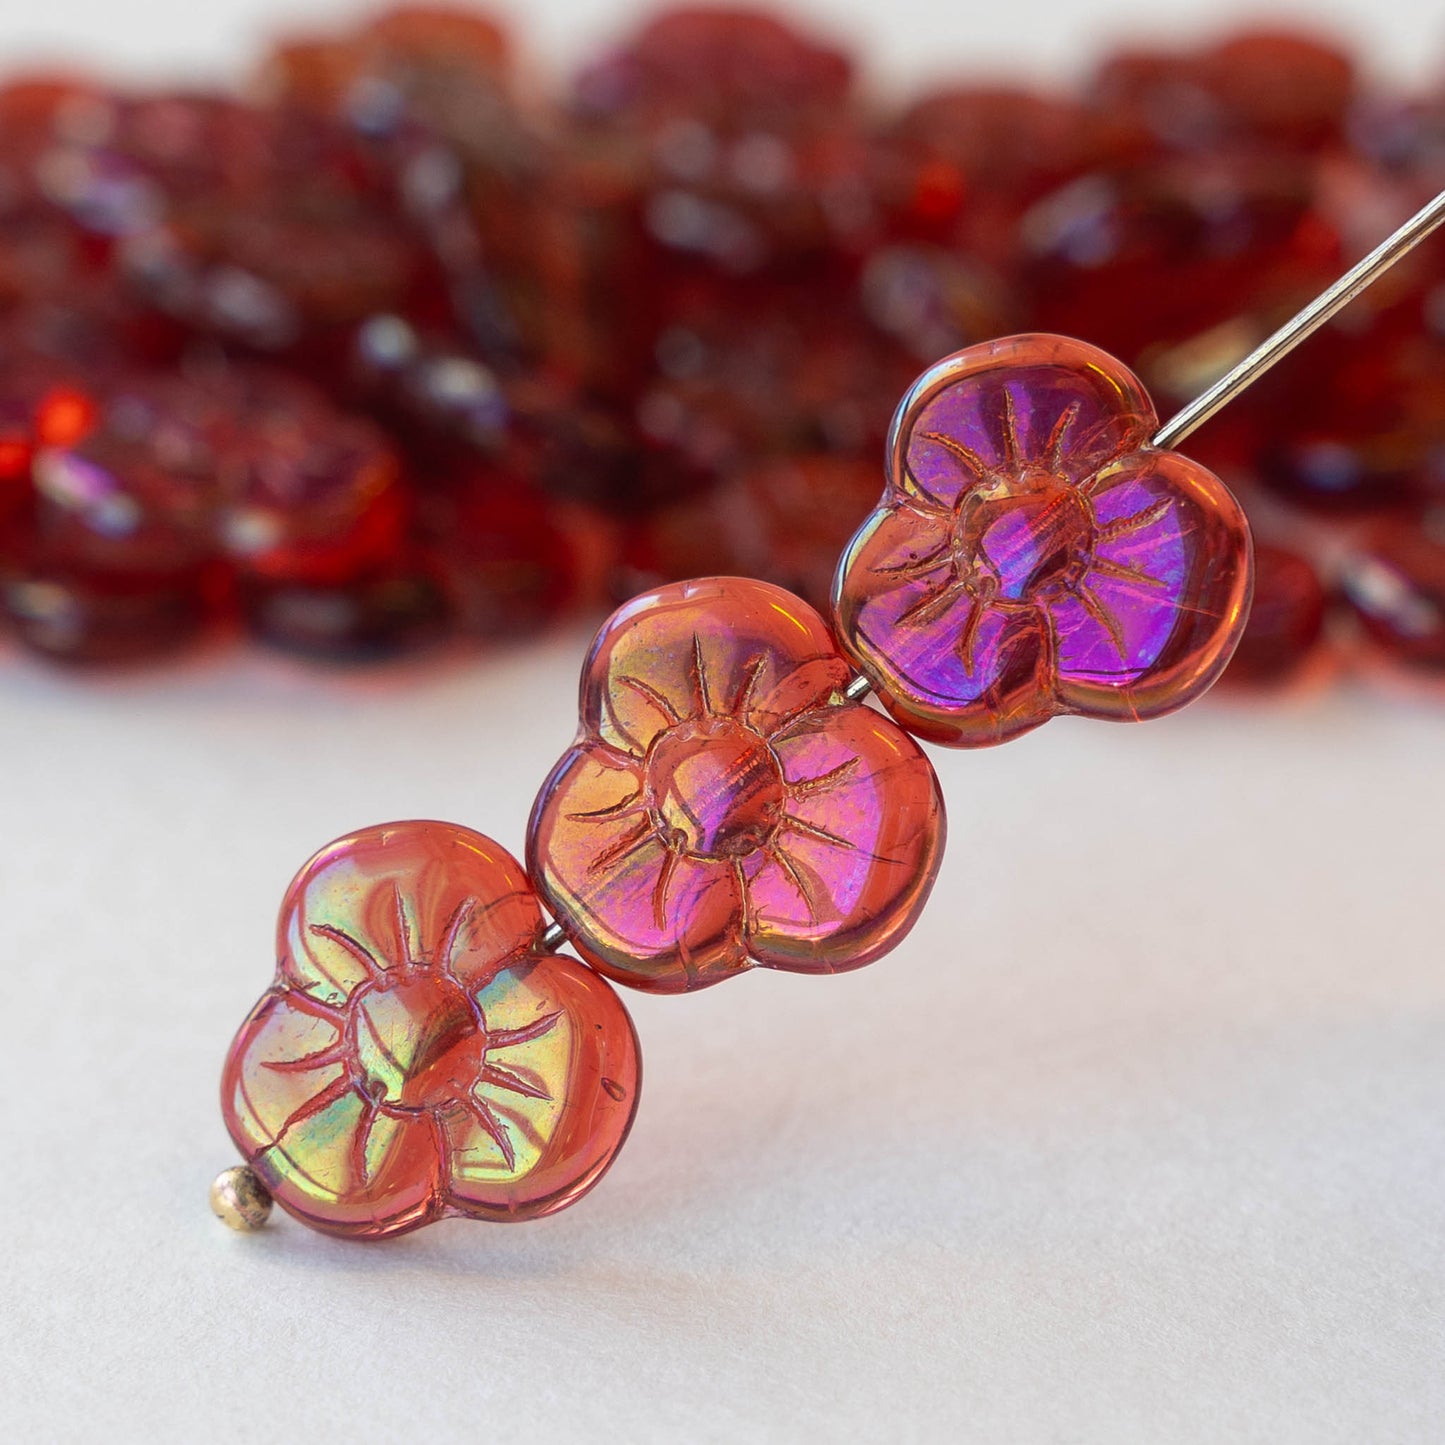 13mm Pansy Flower Beads - Red - 10 Beads – funkyprettybeads